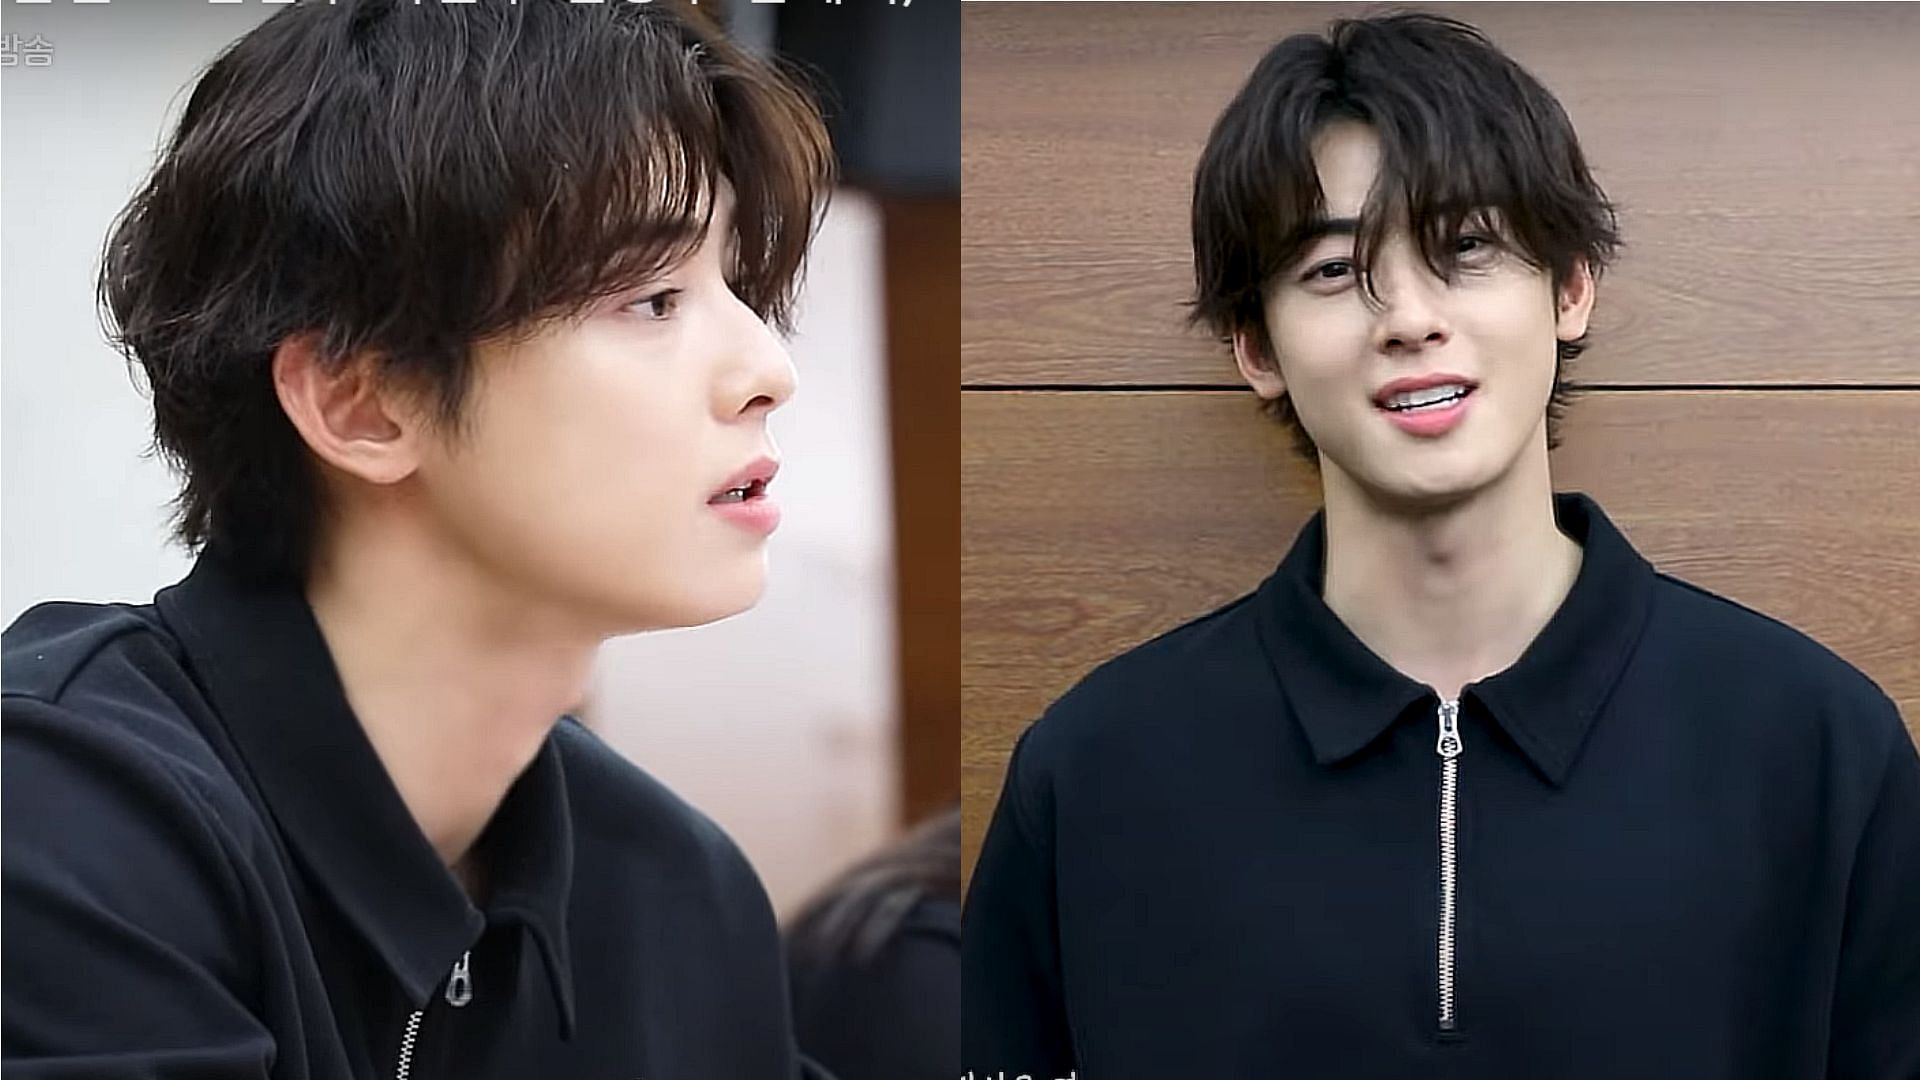 Cha eunwoo stuns fans with his simple script-readind look (Images via Youtube/ MBCdrama)